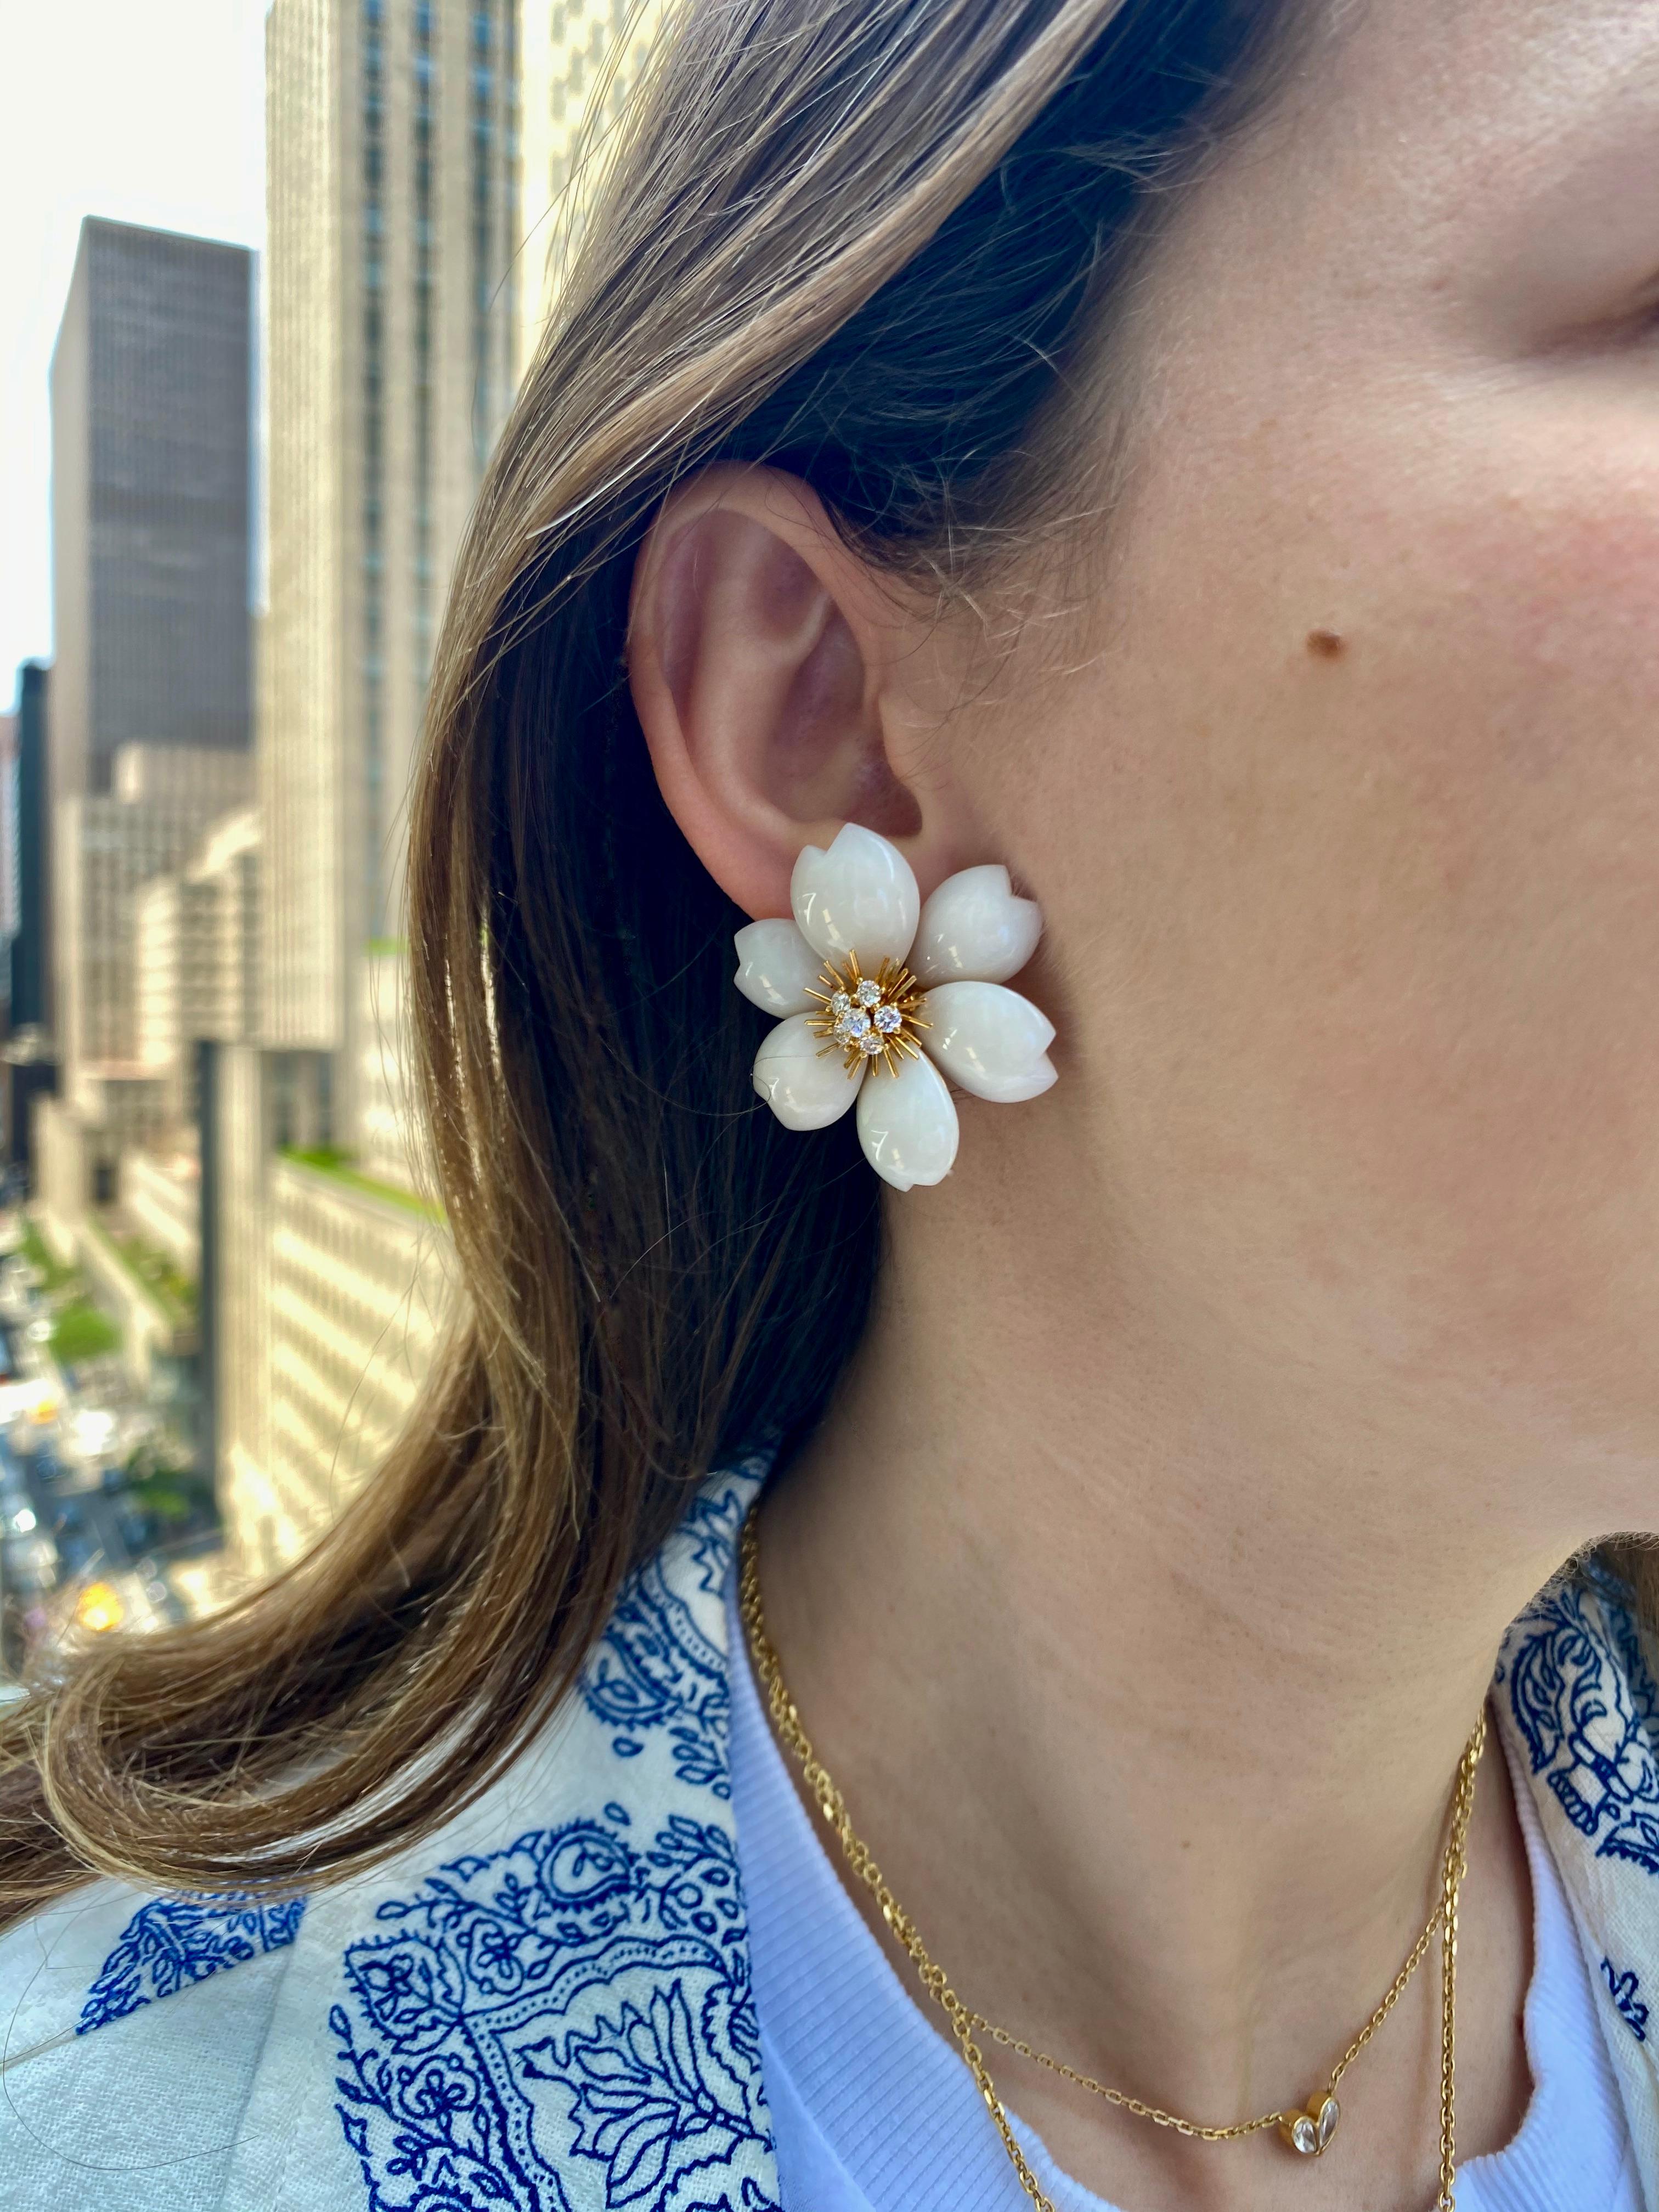 Symbolizing beauty and romance, the Rose de Noel has been one of VCA's most iconic collections since being introduced in the 1970s.  With the earrings being especially popular, these designs are becoming harder and harder to get- particularly in